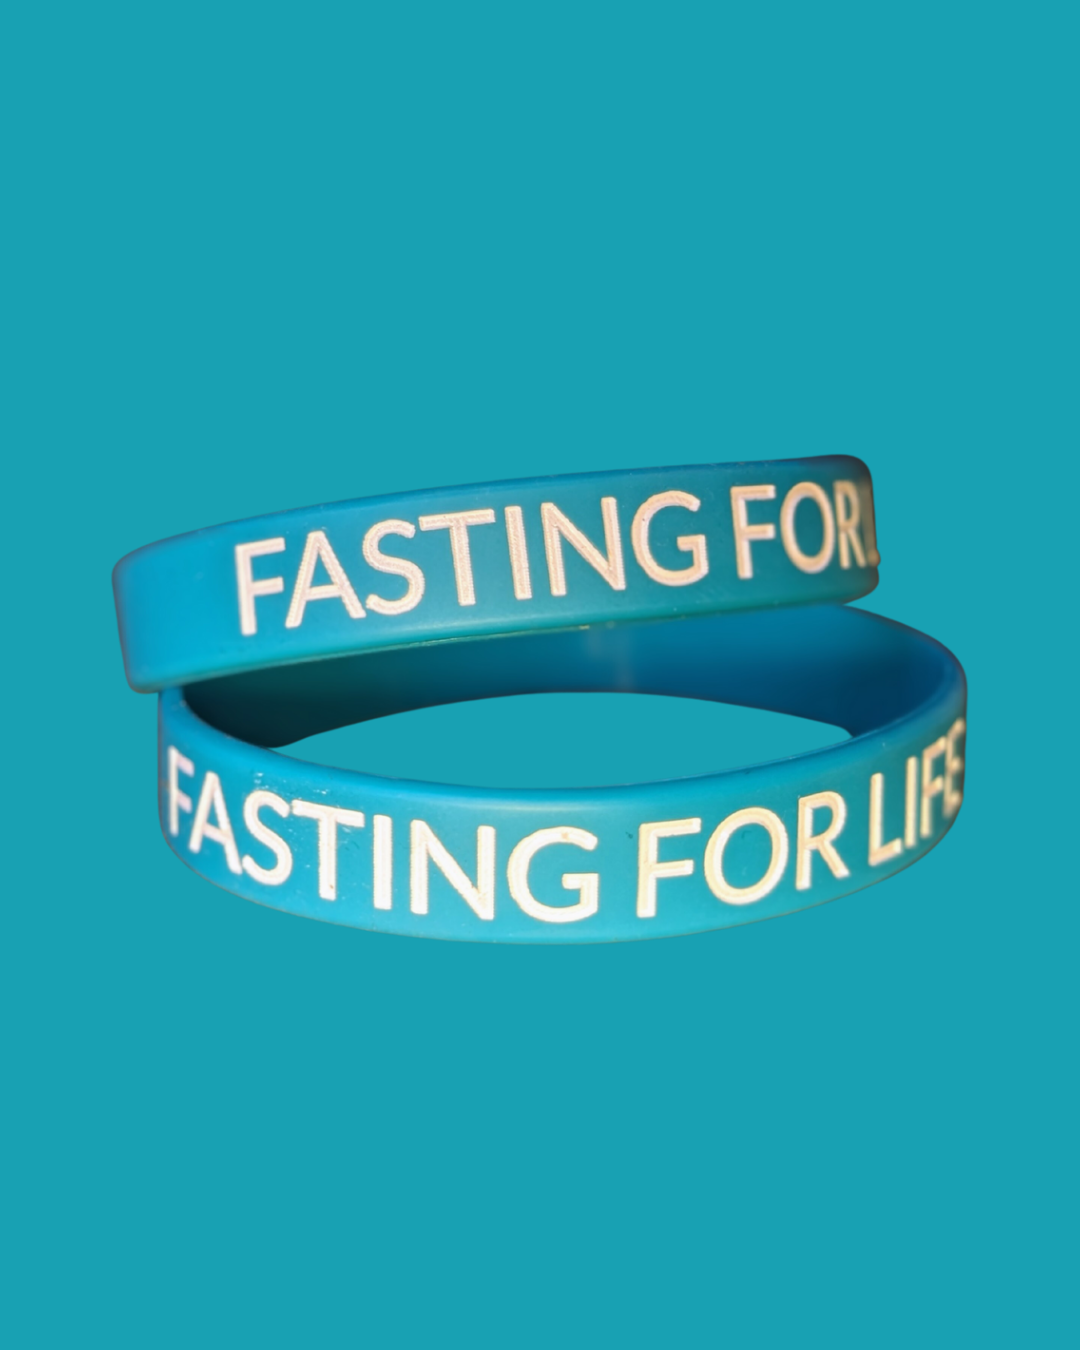 Fasting For Life Charity Wristband